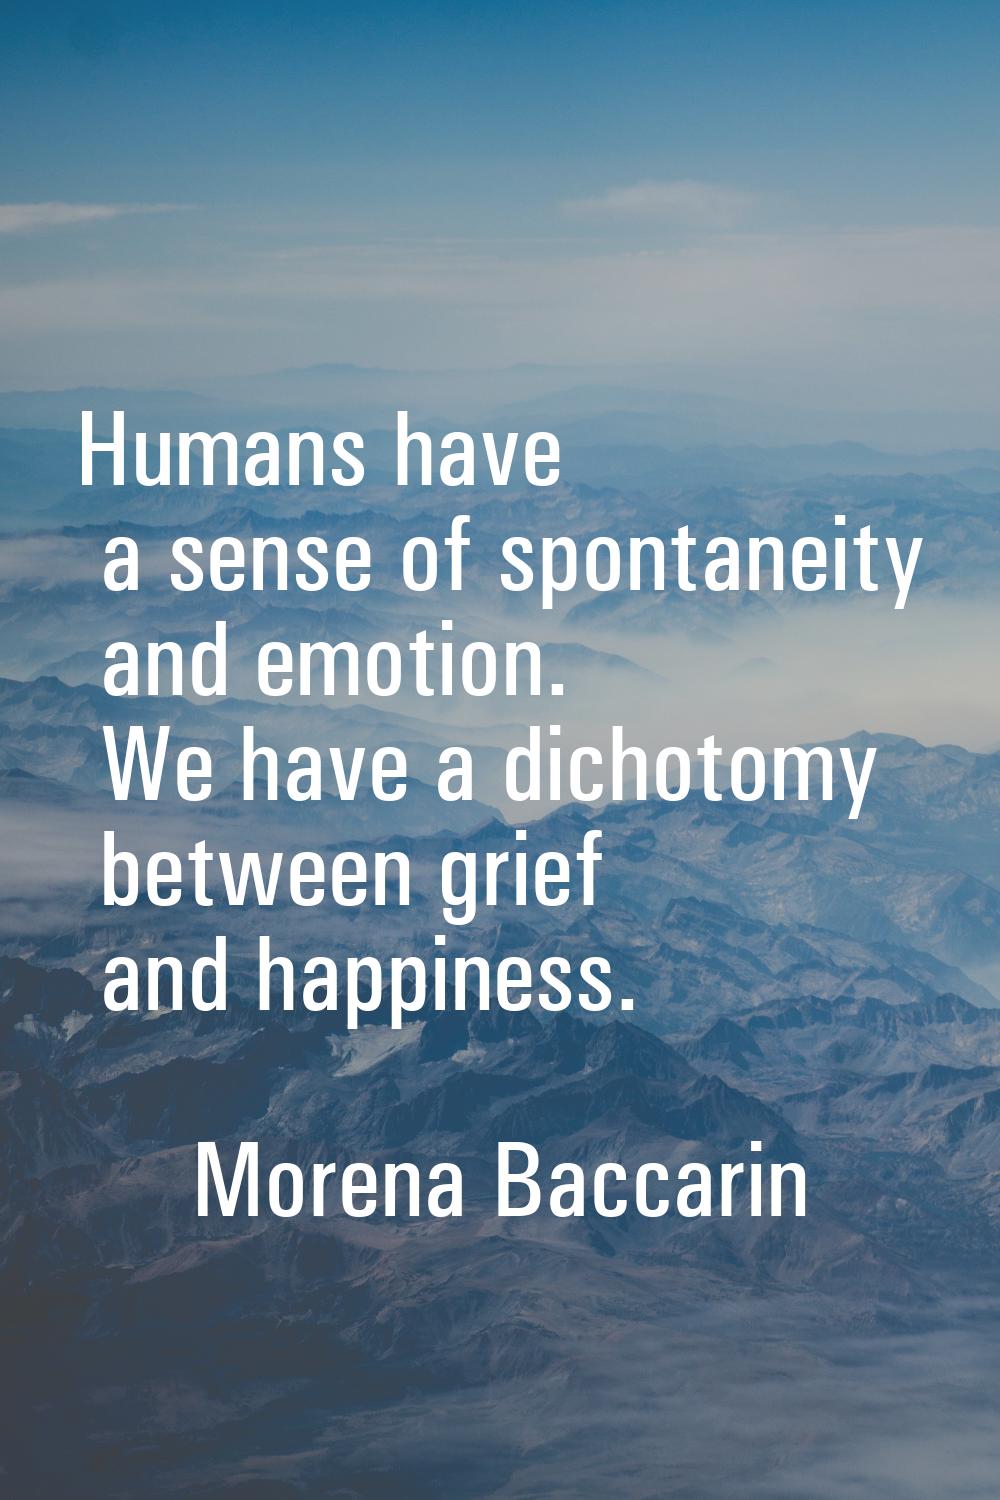 Humans have a sense of spontaneity and emotion. We have a dichotomy between grief and happiness.